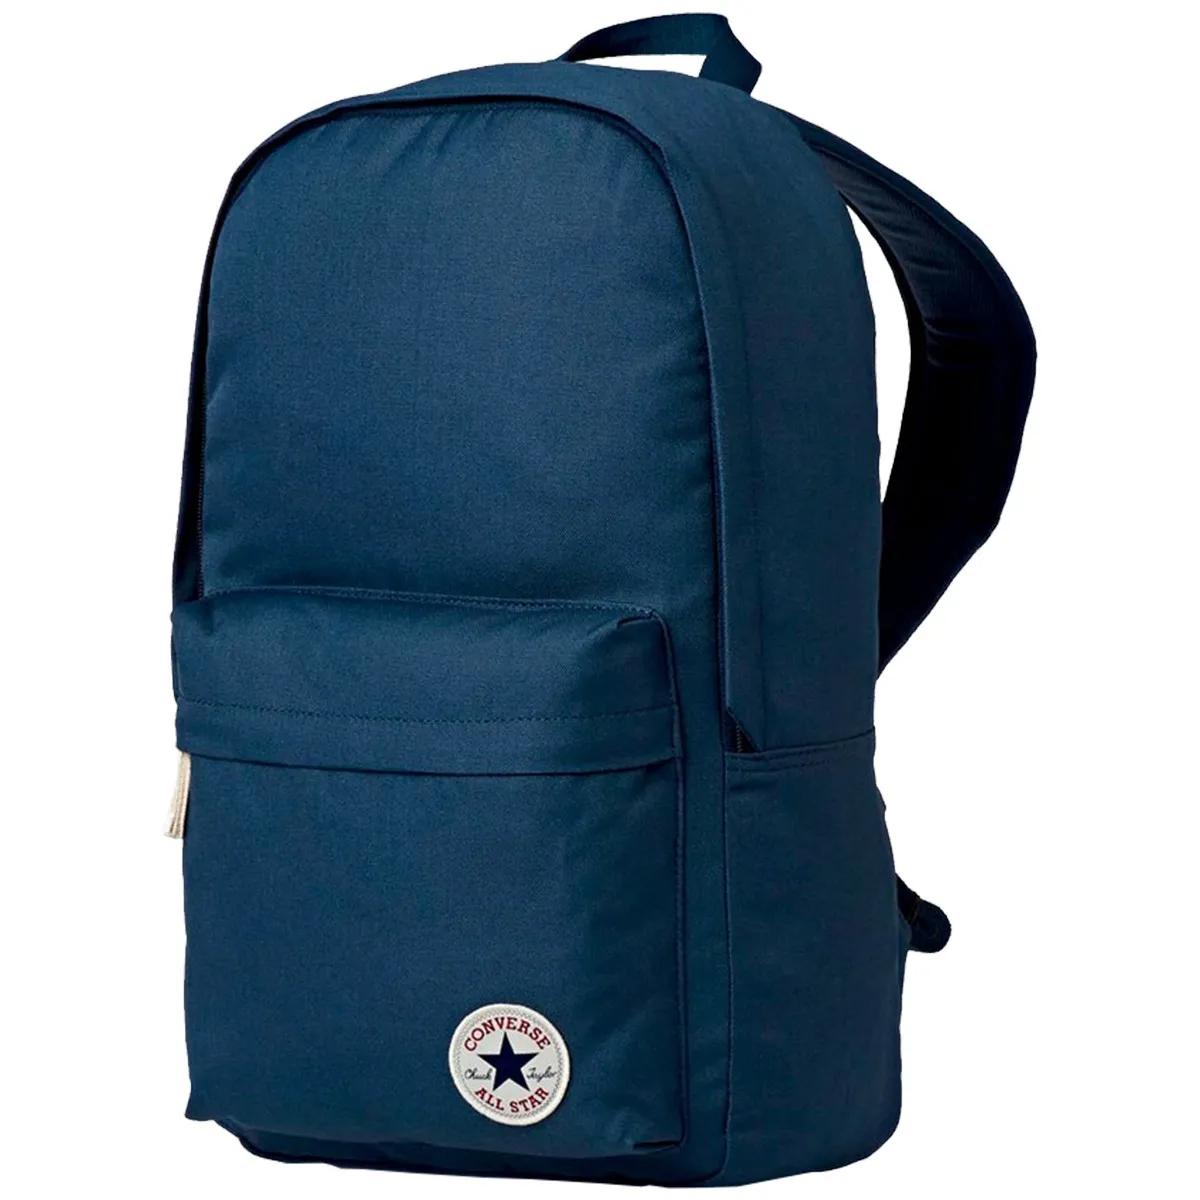 Converse CORE POLY BACKPACK 